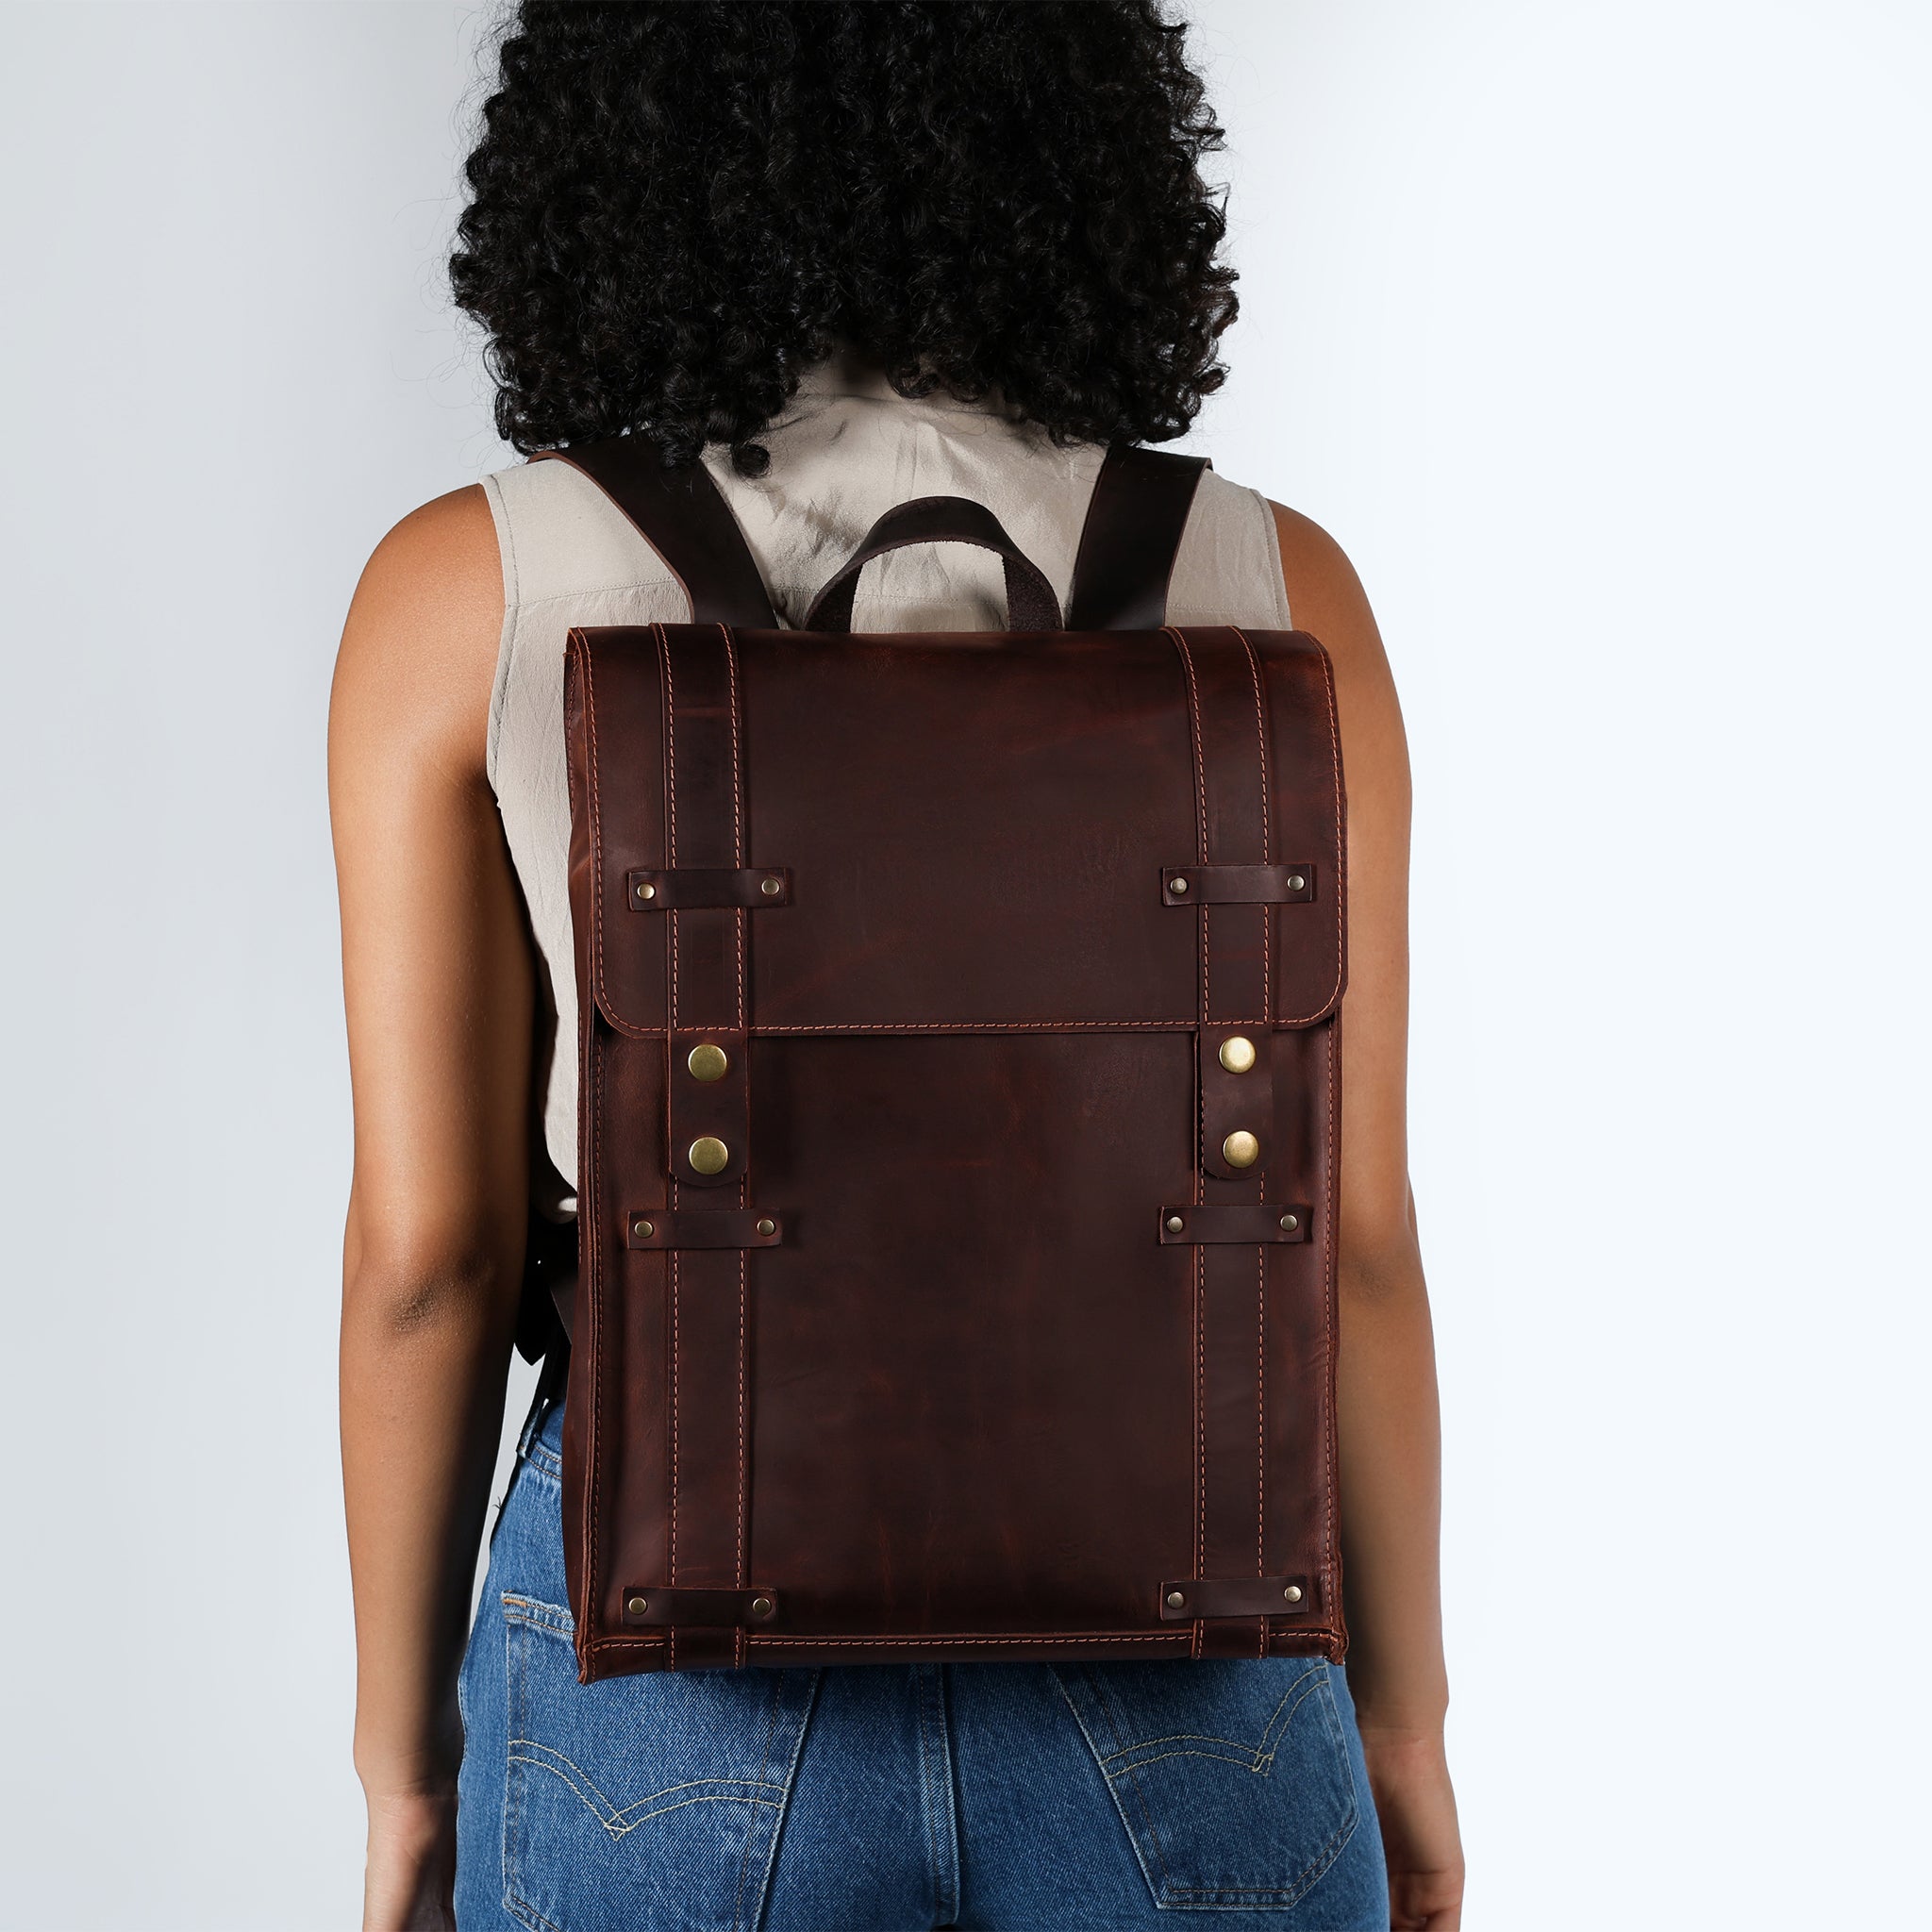 Women's Handcrafting Leather Backpack - Storyteller 13", 14", 15" and 16" inch laptops